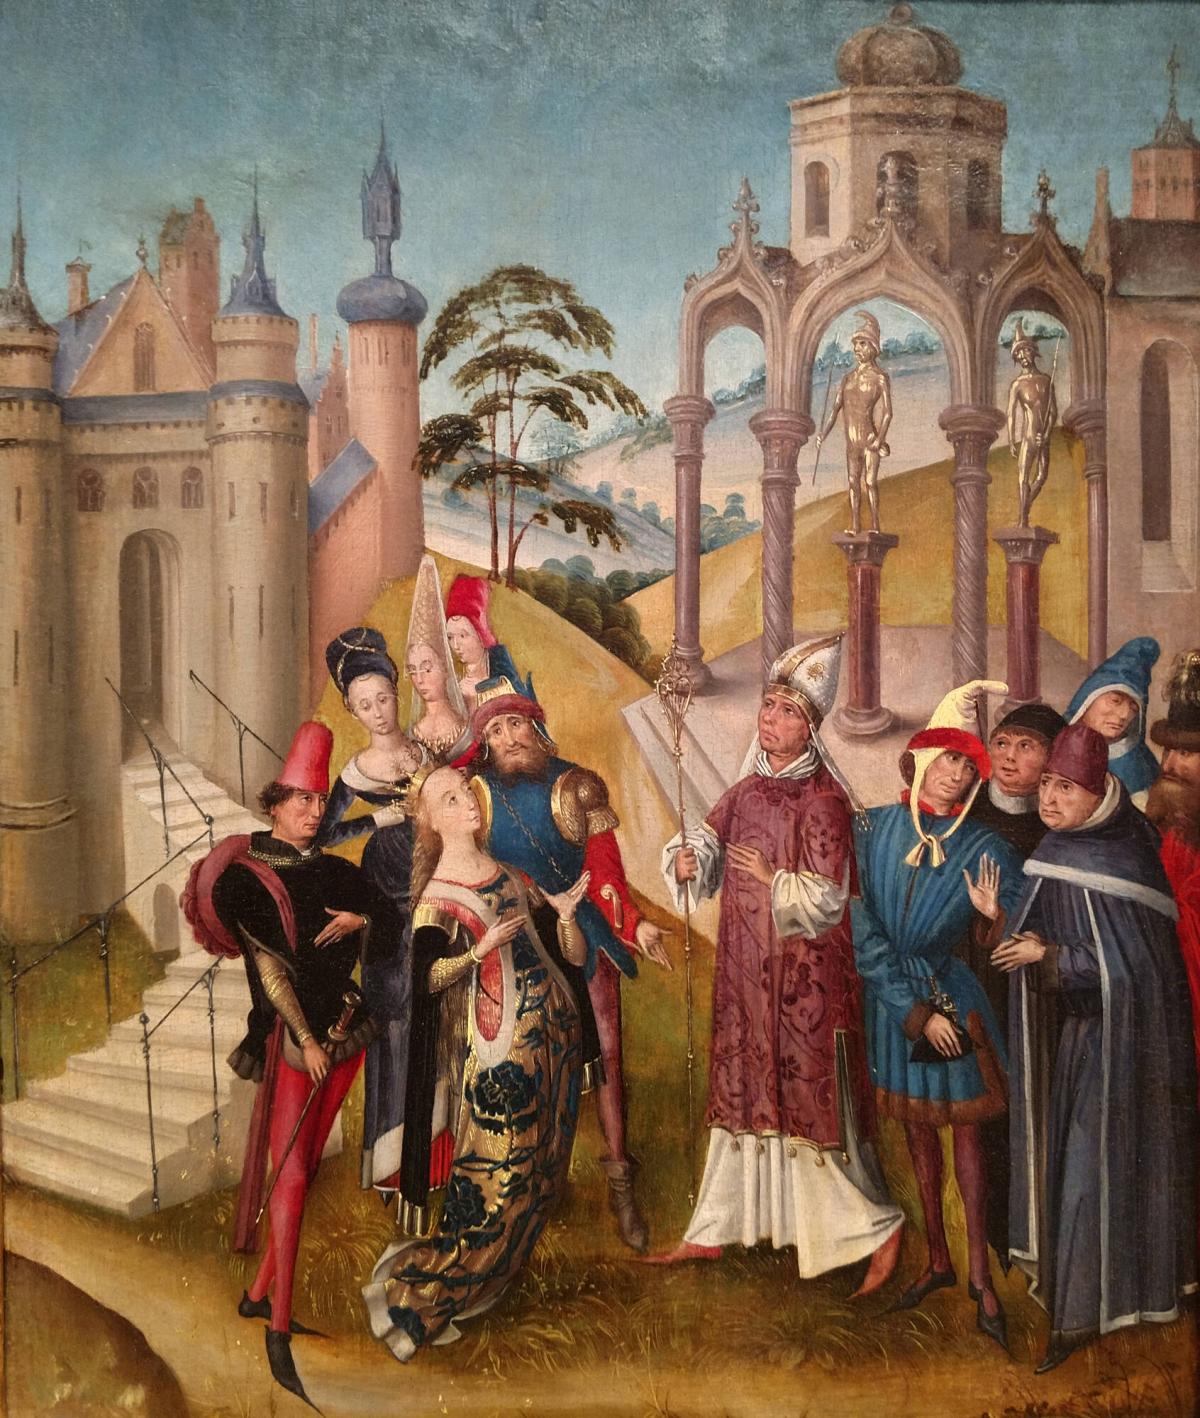 St. Catherine Disputing with the Scholars